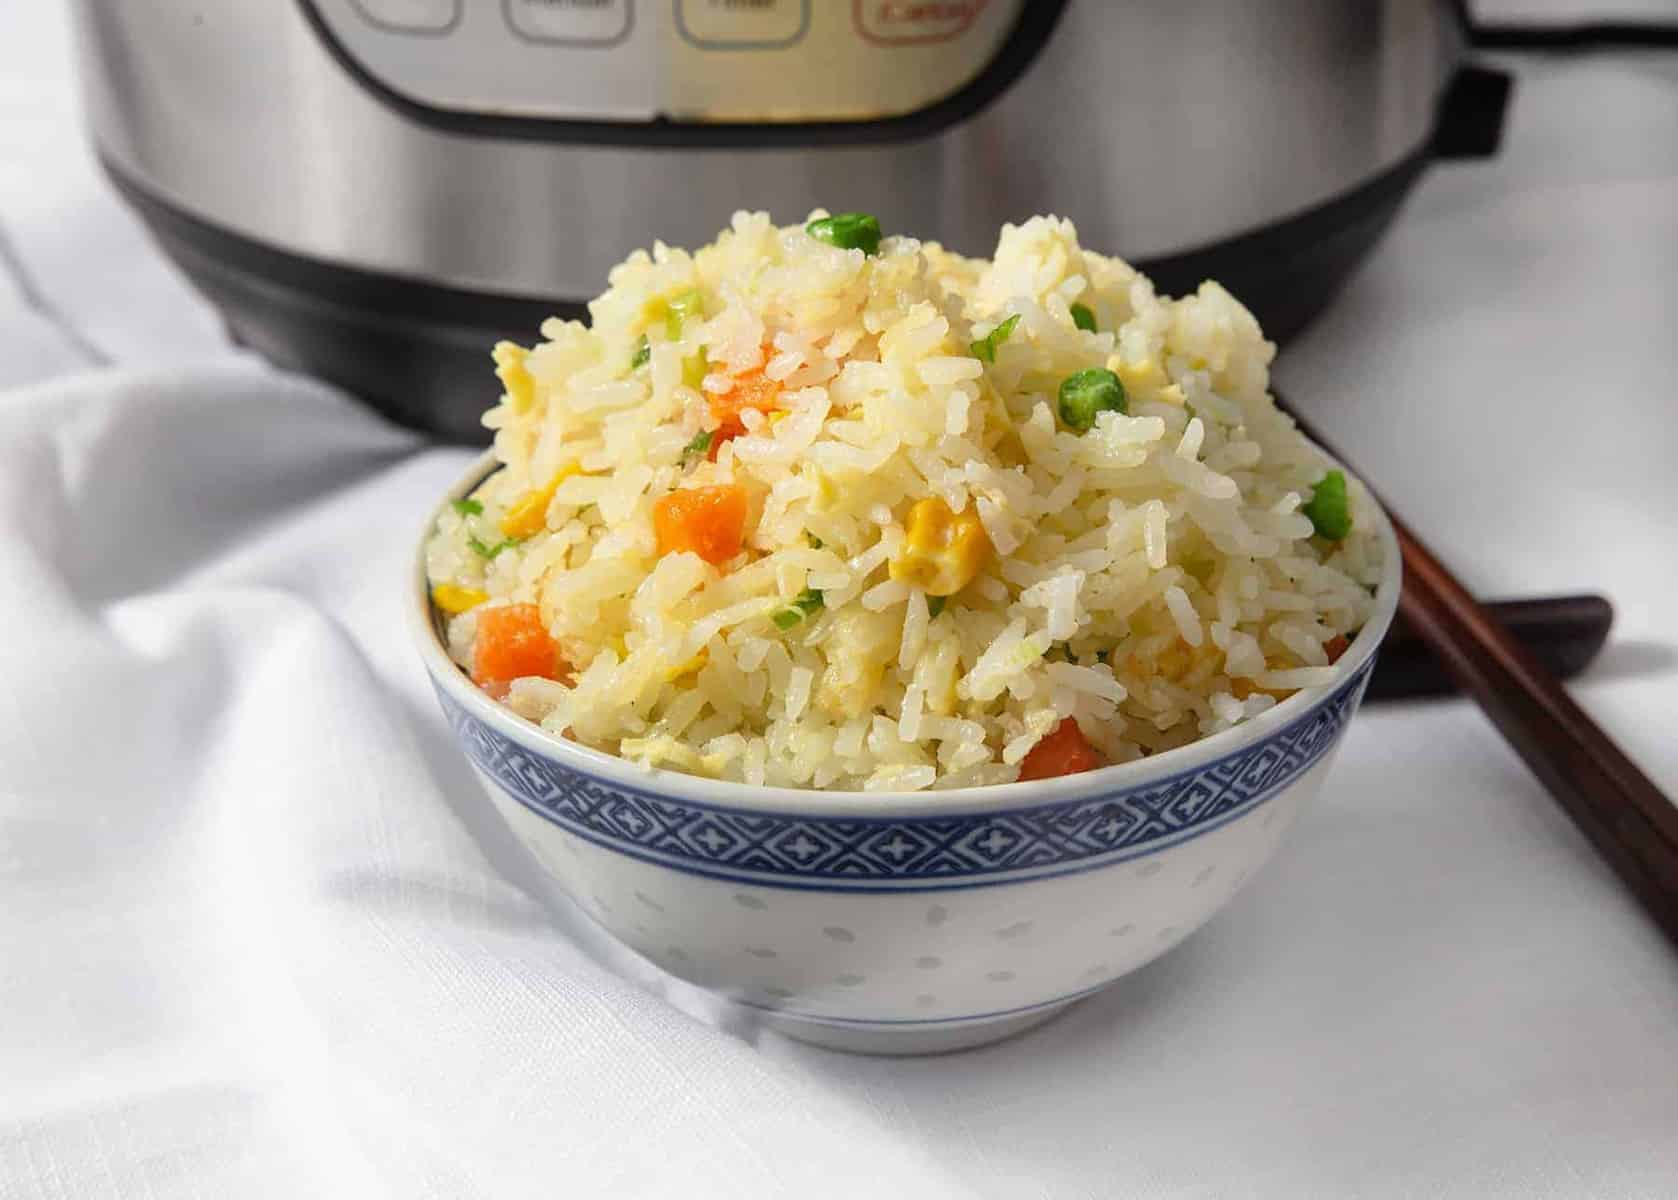 Instant Pot Fried Rice | Pressure Cooker Fried Rice | Chinese Fried Rice | Egg Fried Rice | Instapot Fried Rice | Chinese Recipes #instantpot #pressurecooker #recipes #chinese #easy #side #healthy